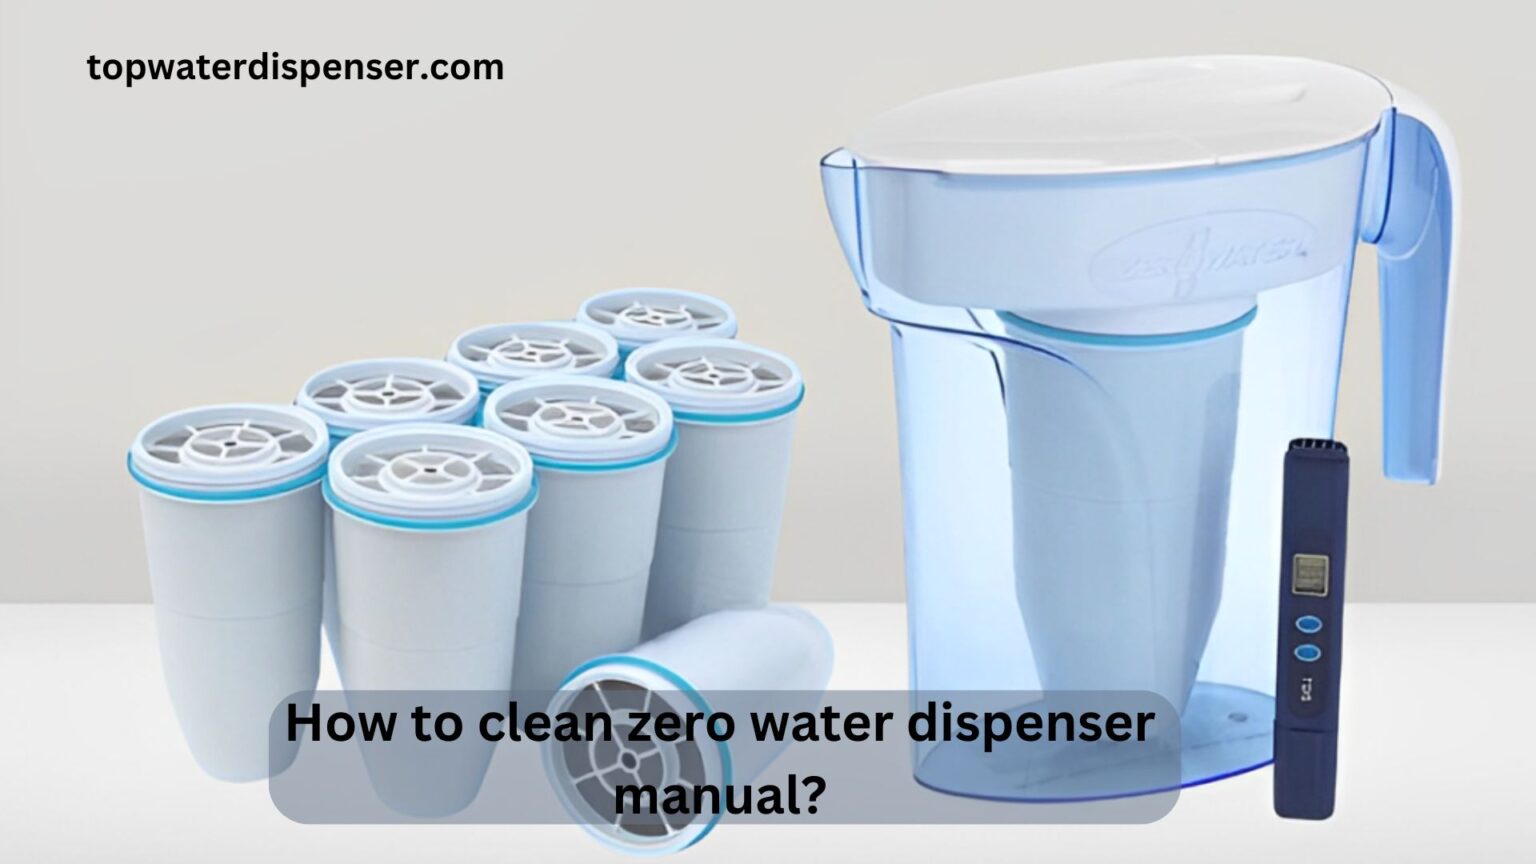 How to clean zero water dispenser manual?